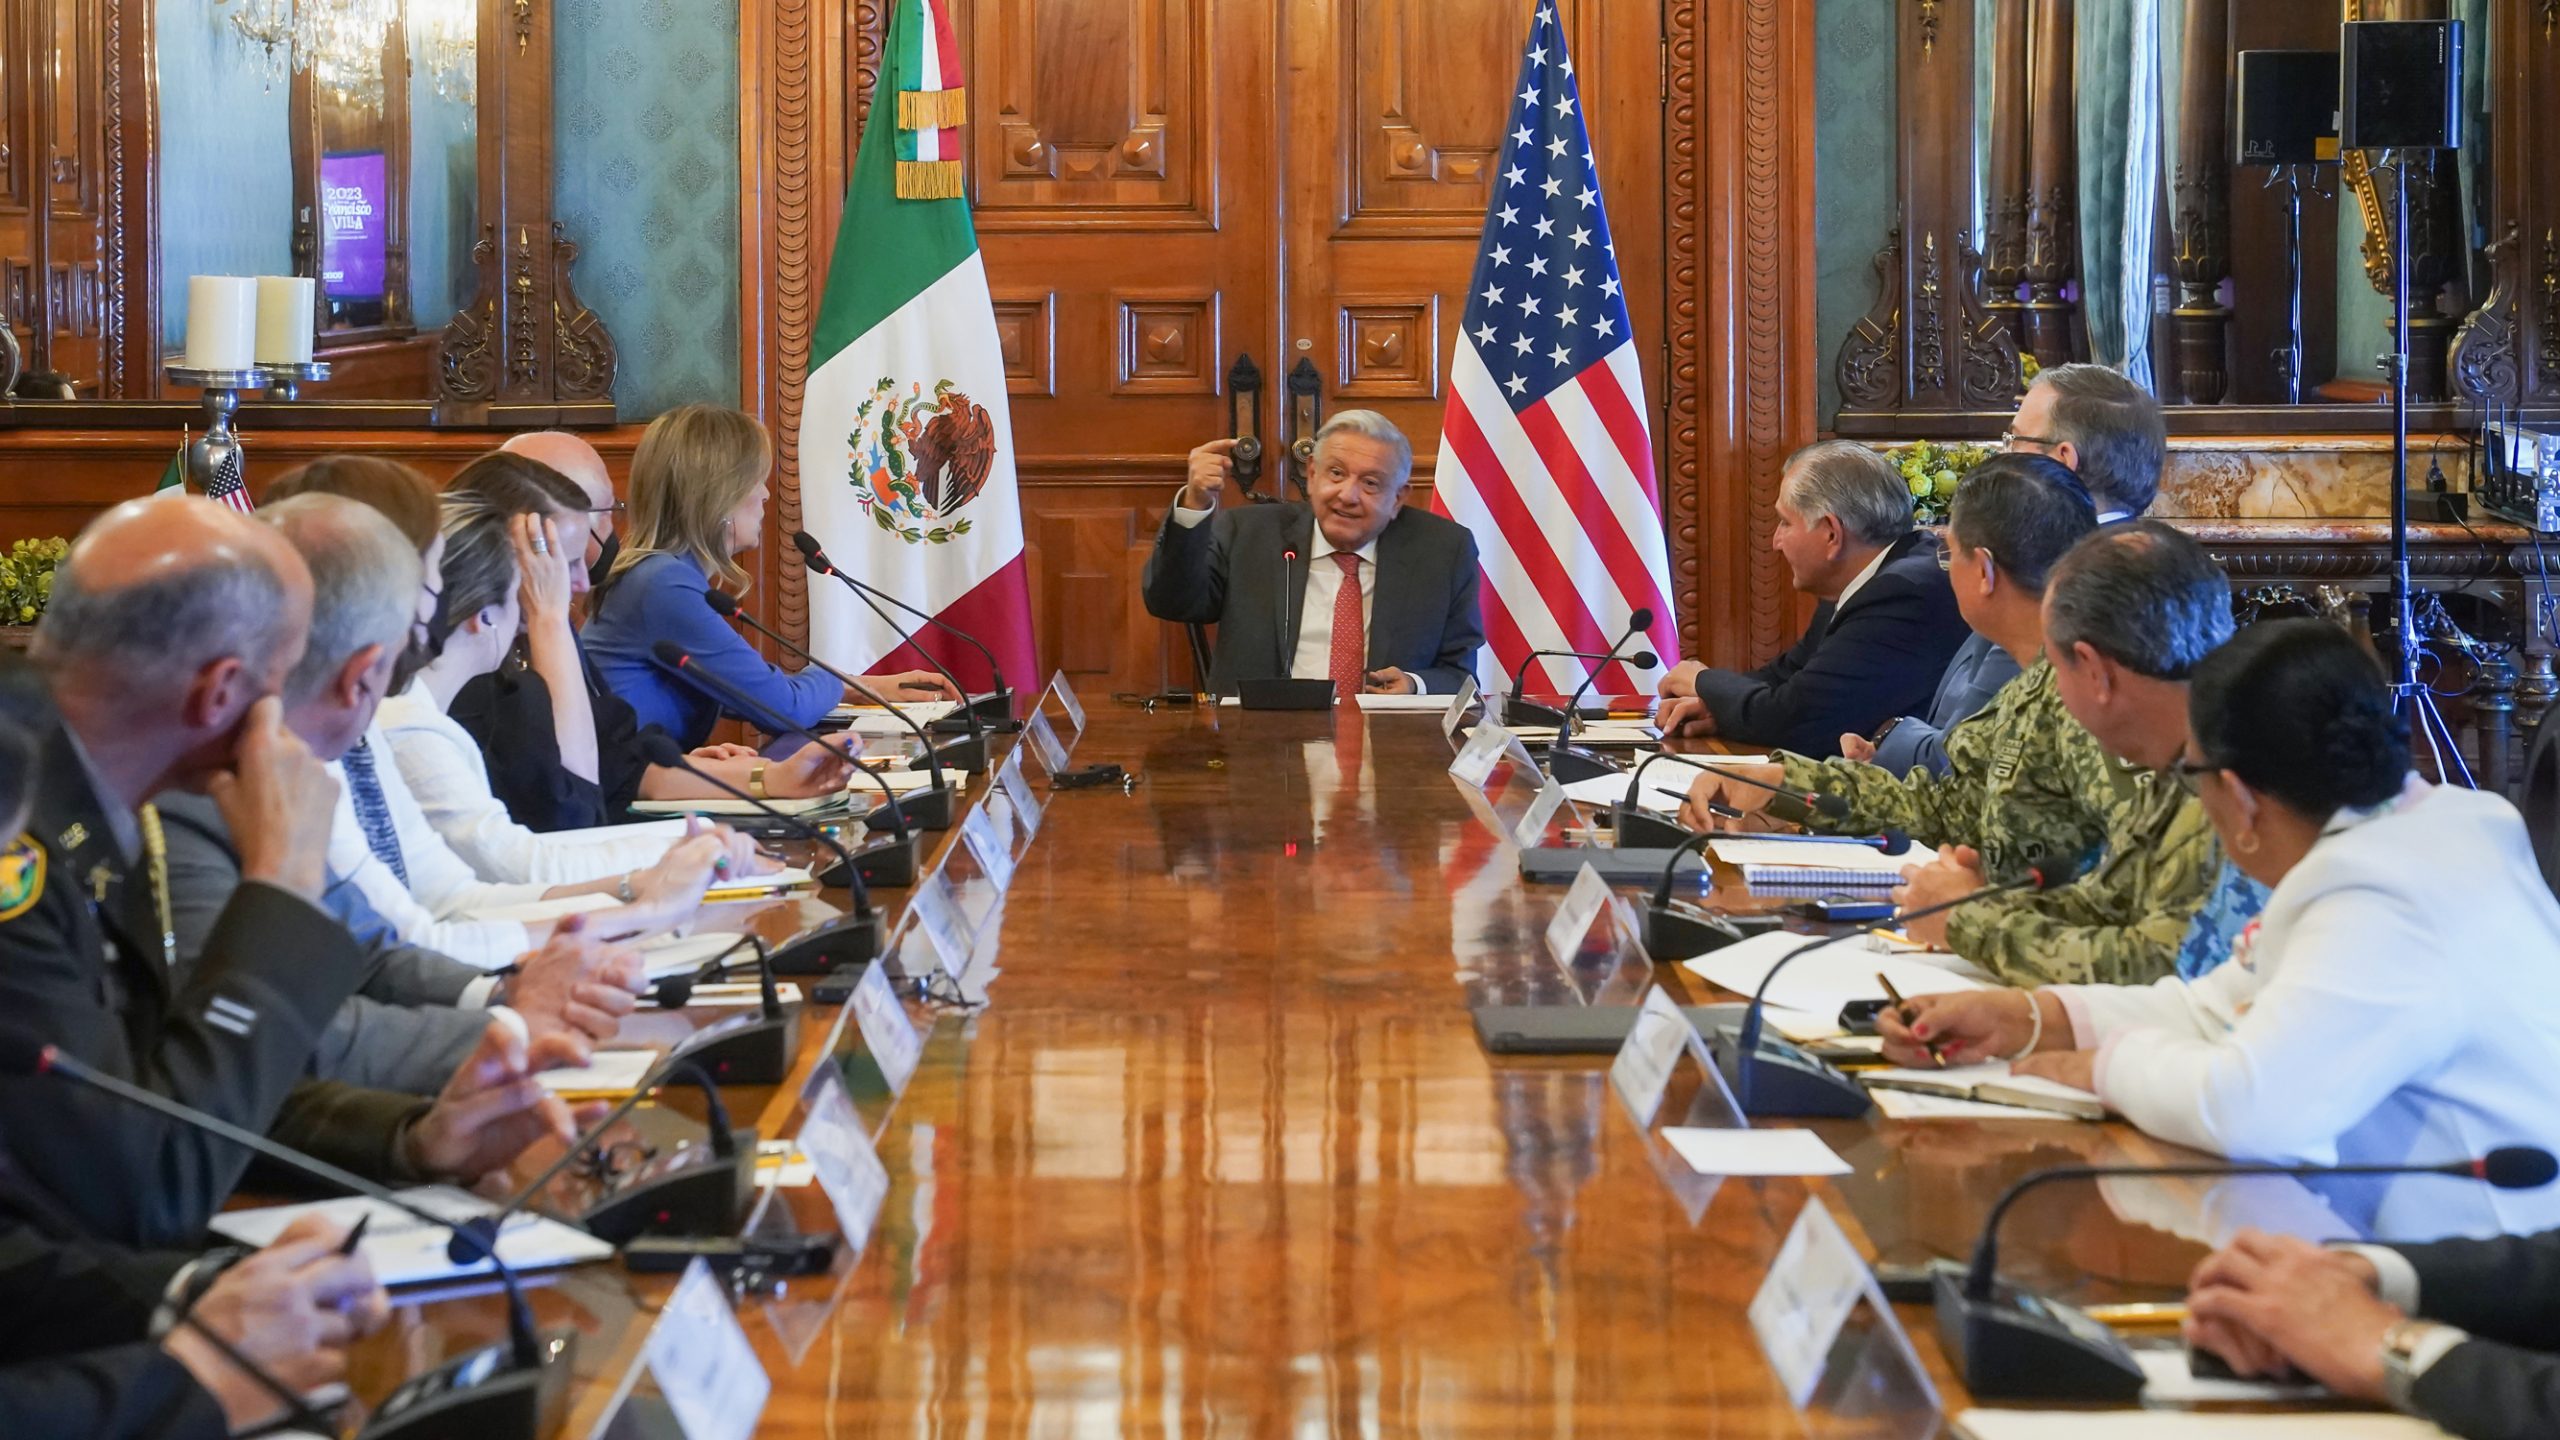 The United States assures Mexico that it will keep the elements of Title 42 in operation